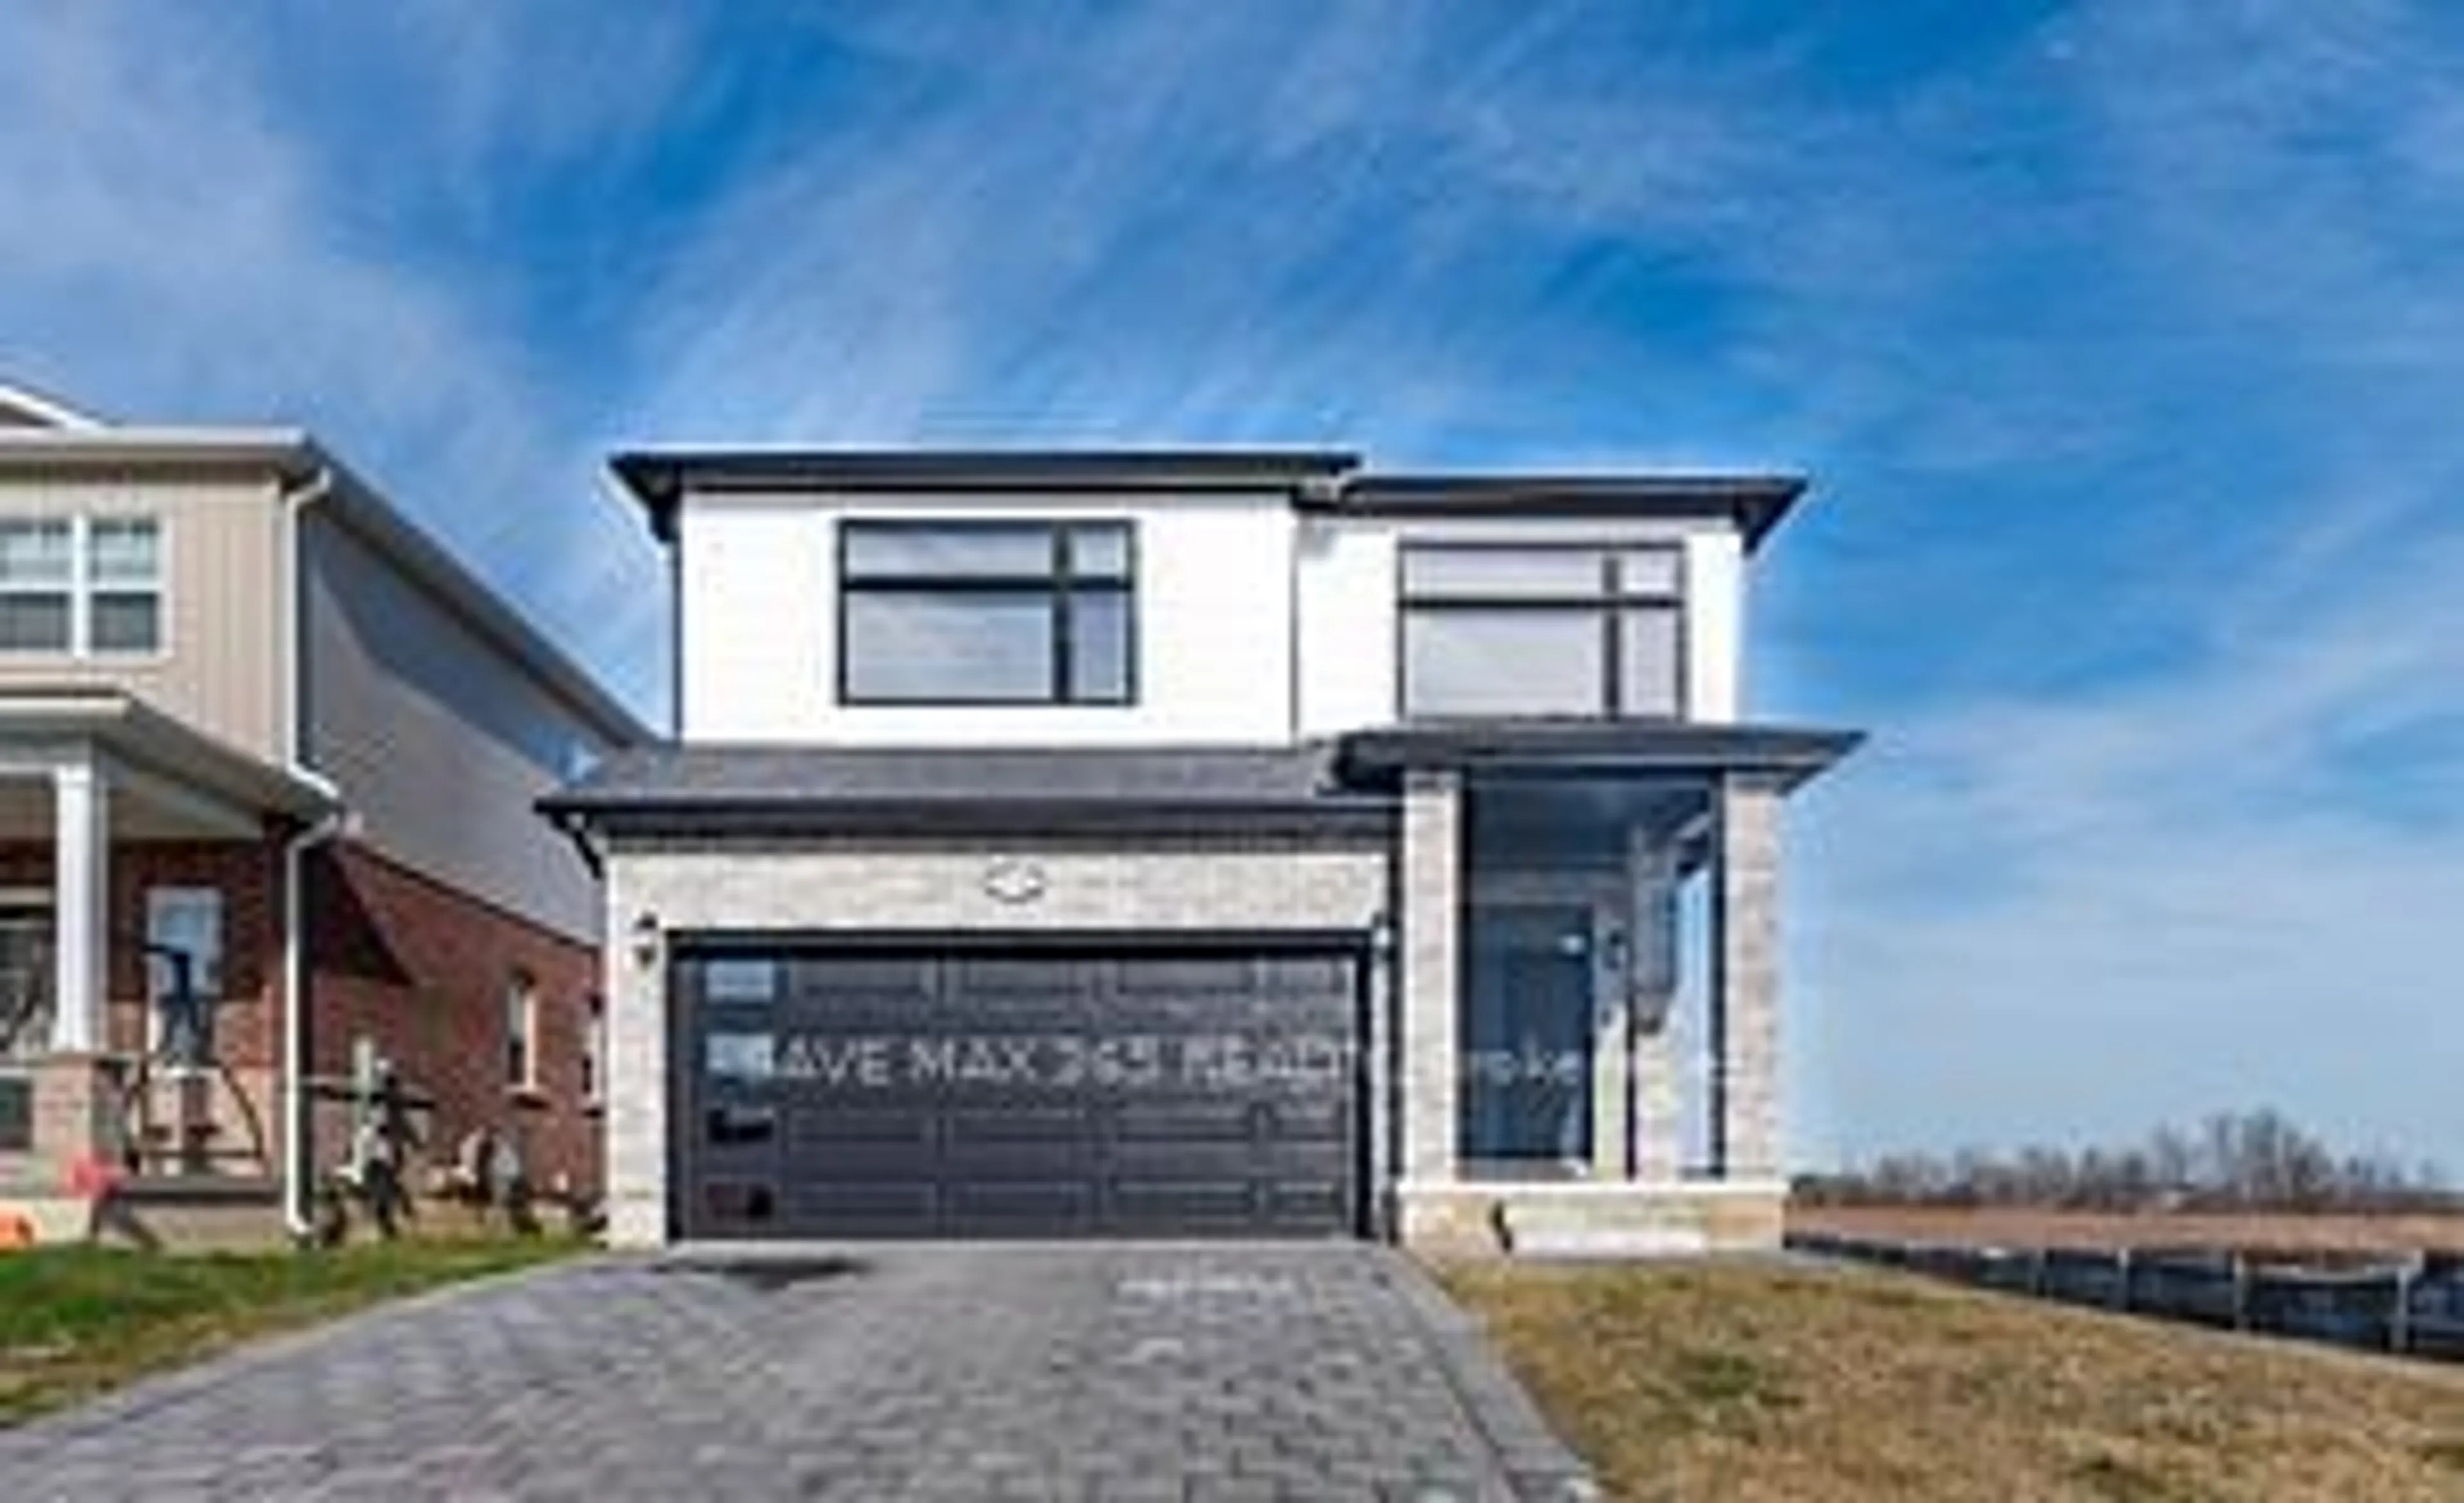 Home with brick exterior material for 3738 Stewart Ave, London Ontario N6L 0J1